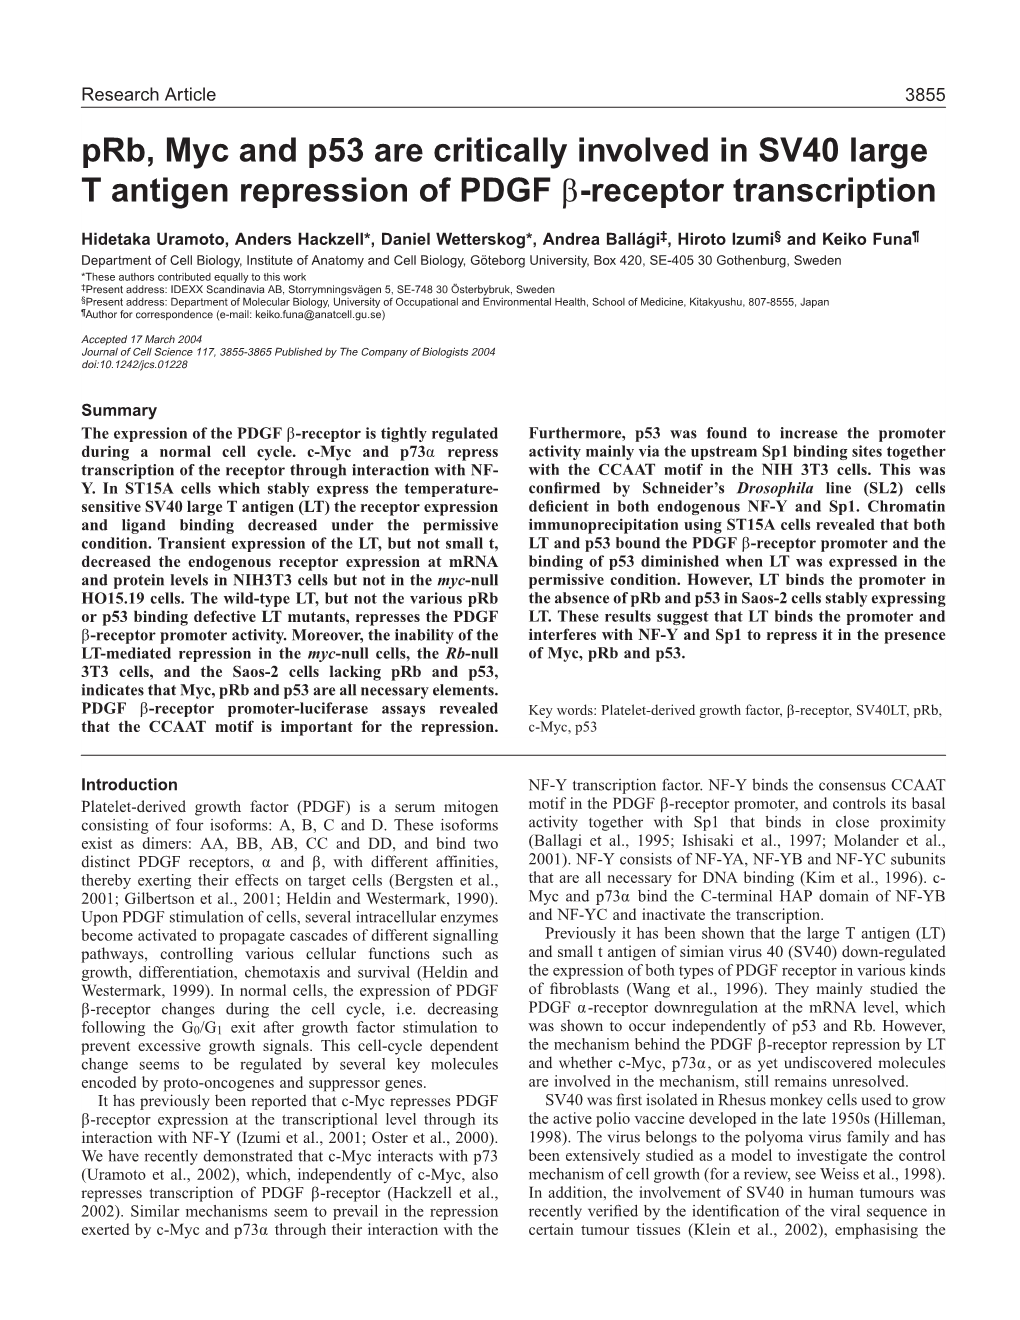 Prb, Myc and P53 Are Critically Involved in SV40 Large T Antigen Repression of PDGF Β-Receptor Transcription